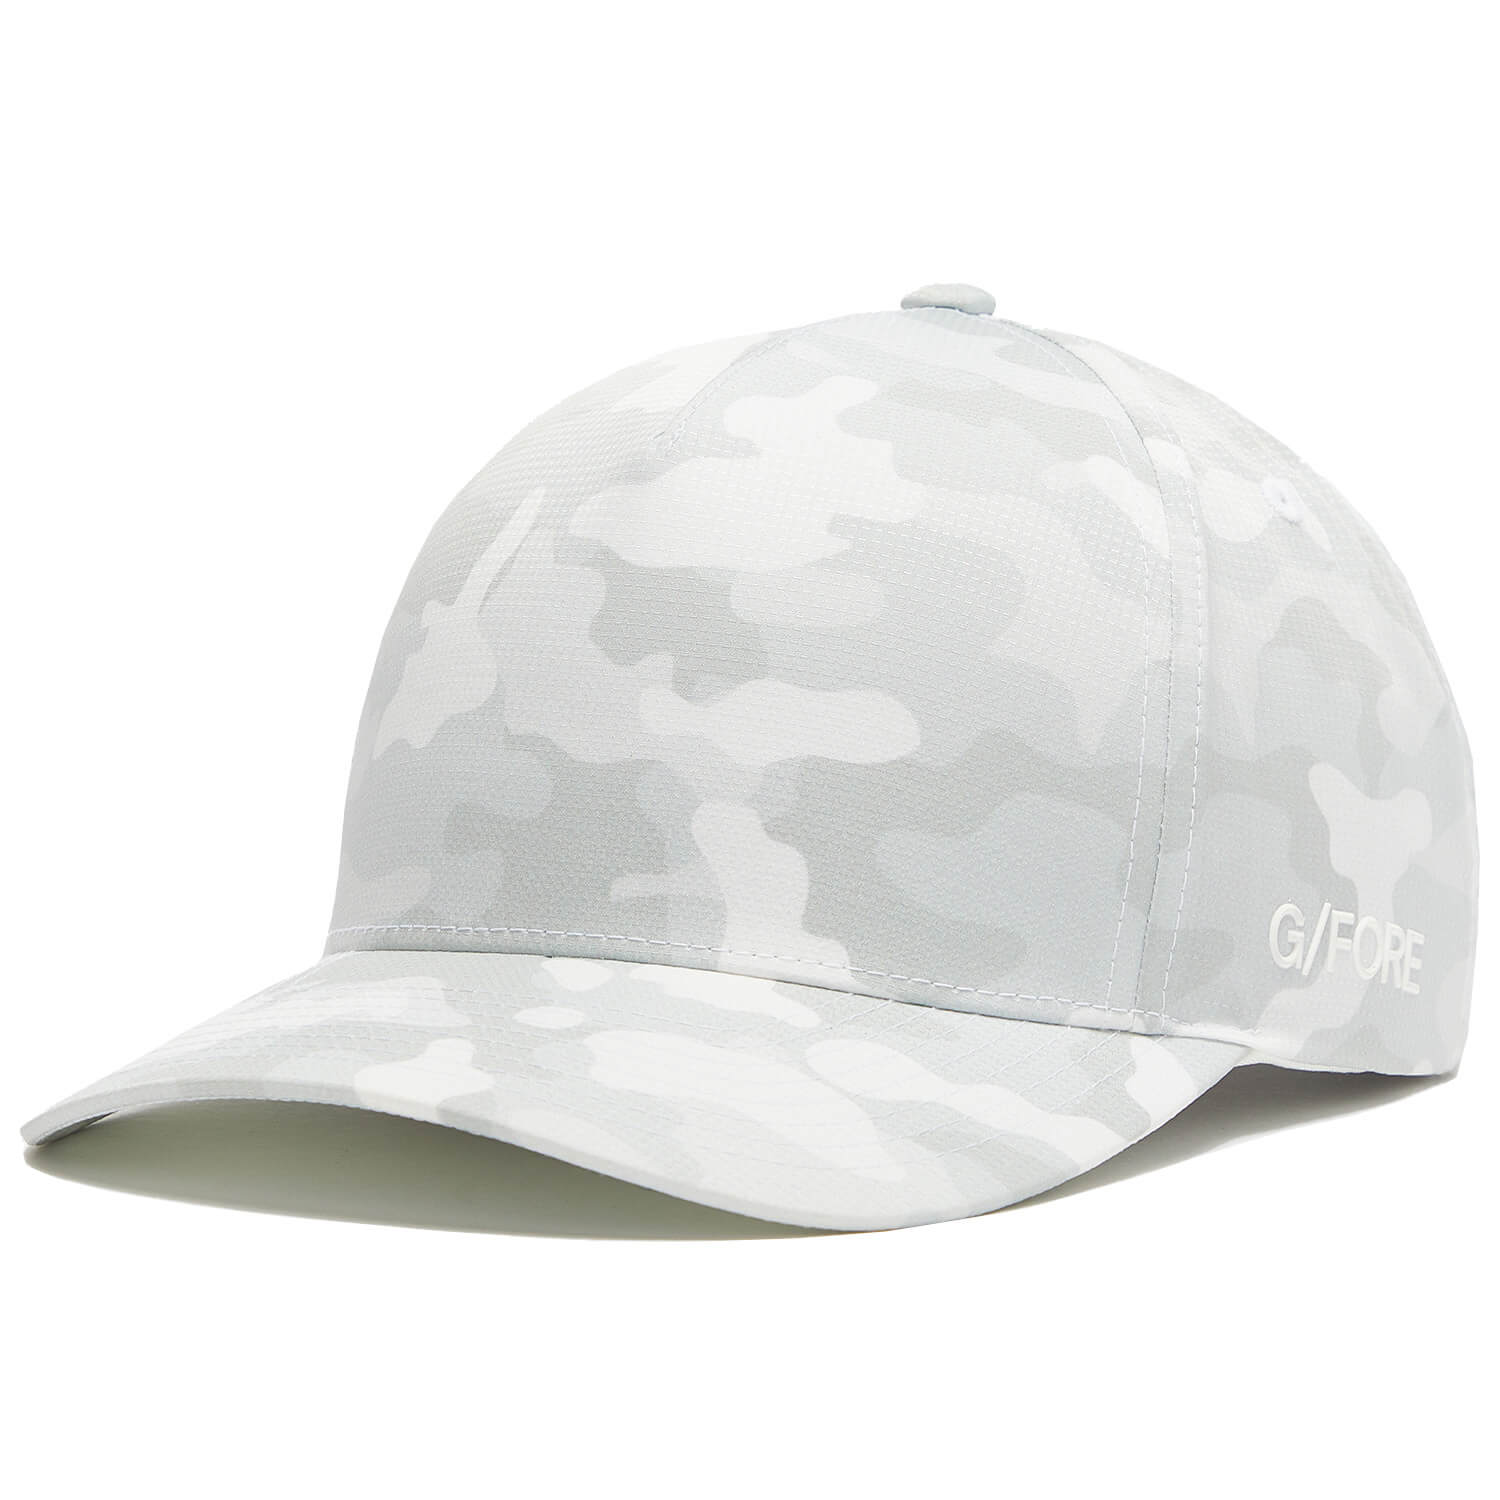 G/FORE Camo Ripstop Quick Turn Cap